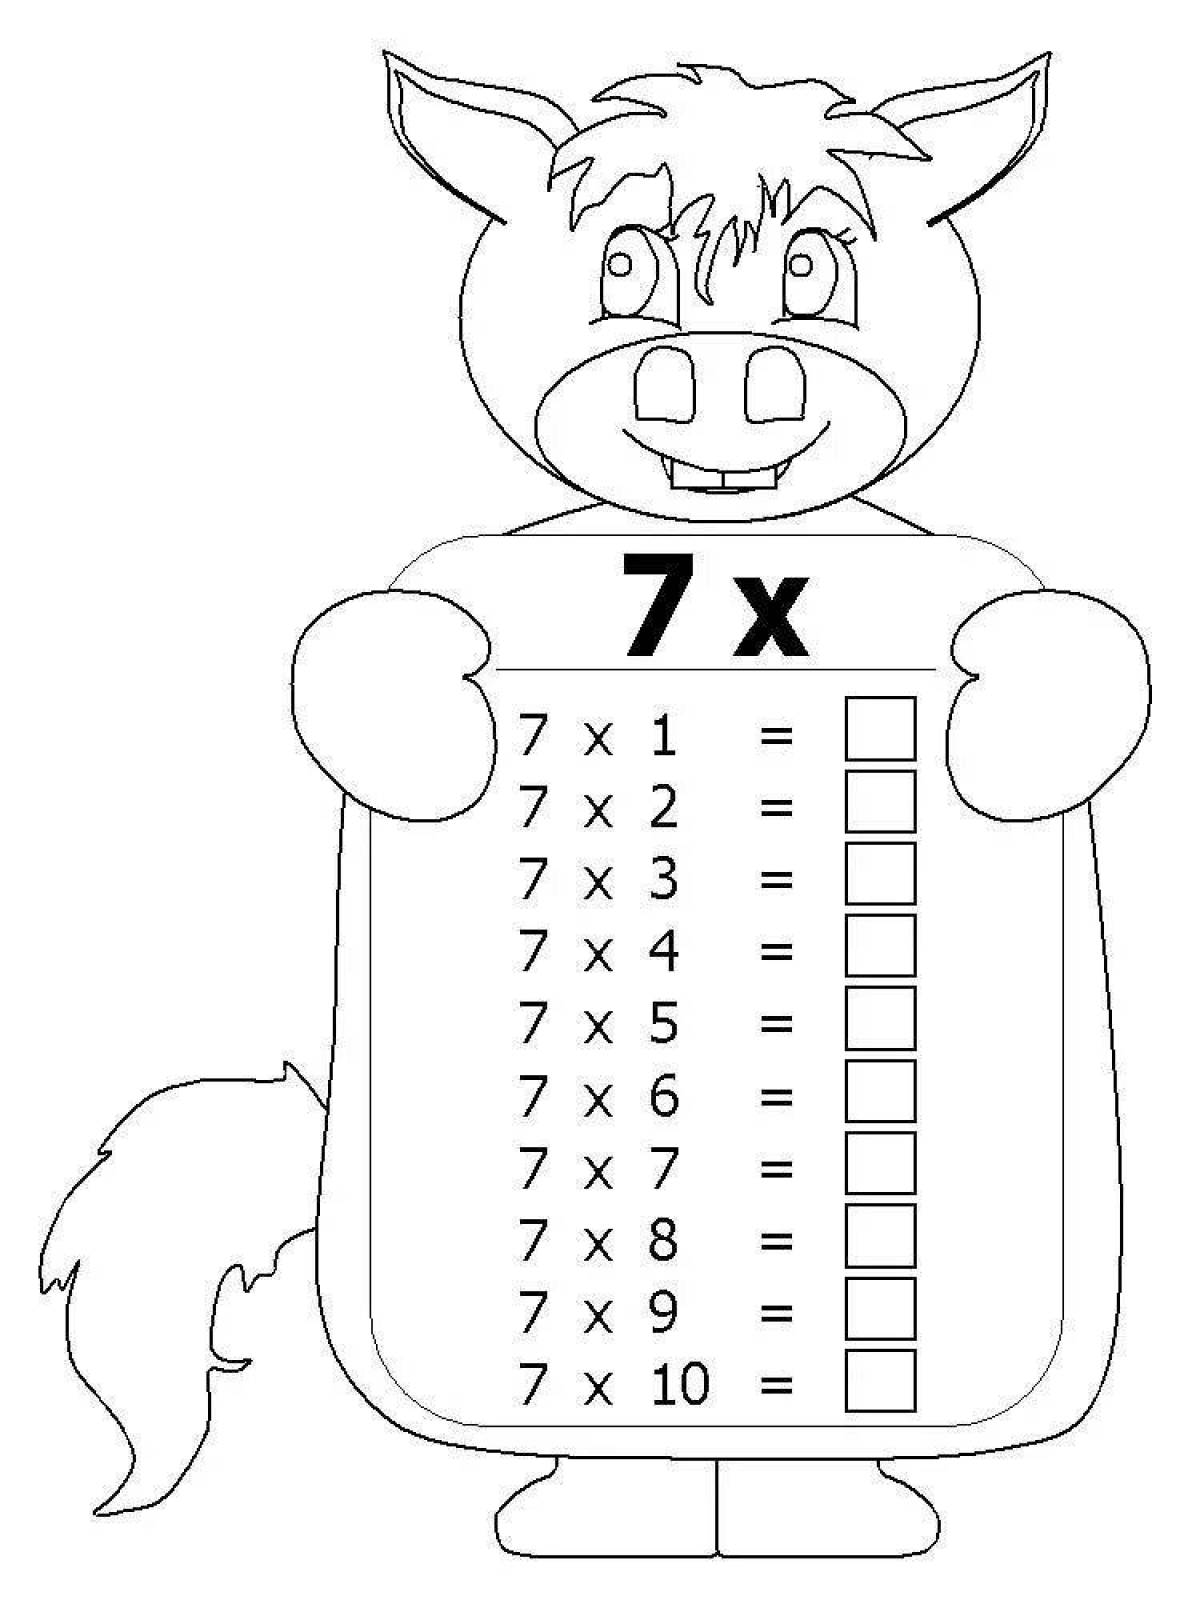 Animated multiplication table for 4